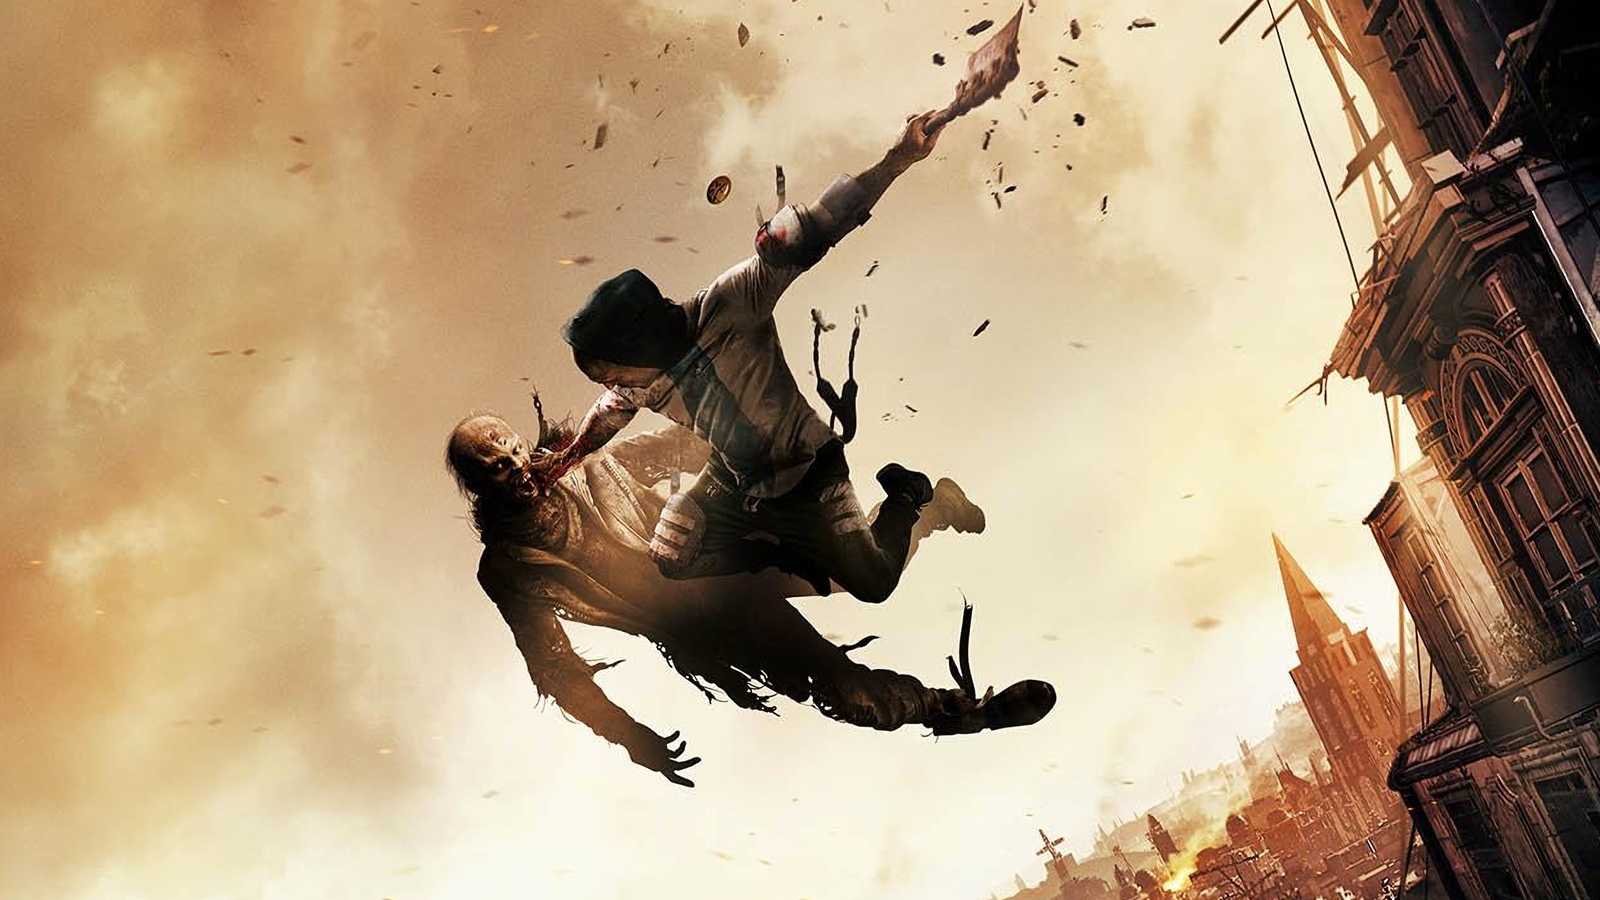 Dying Light 2 Shows the Difference Between Disappointing and